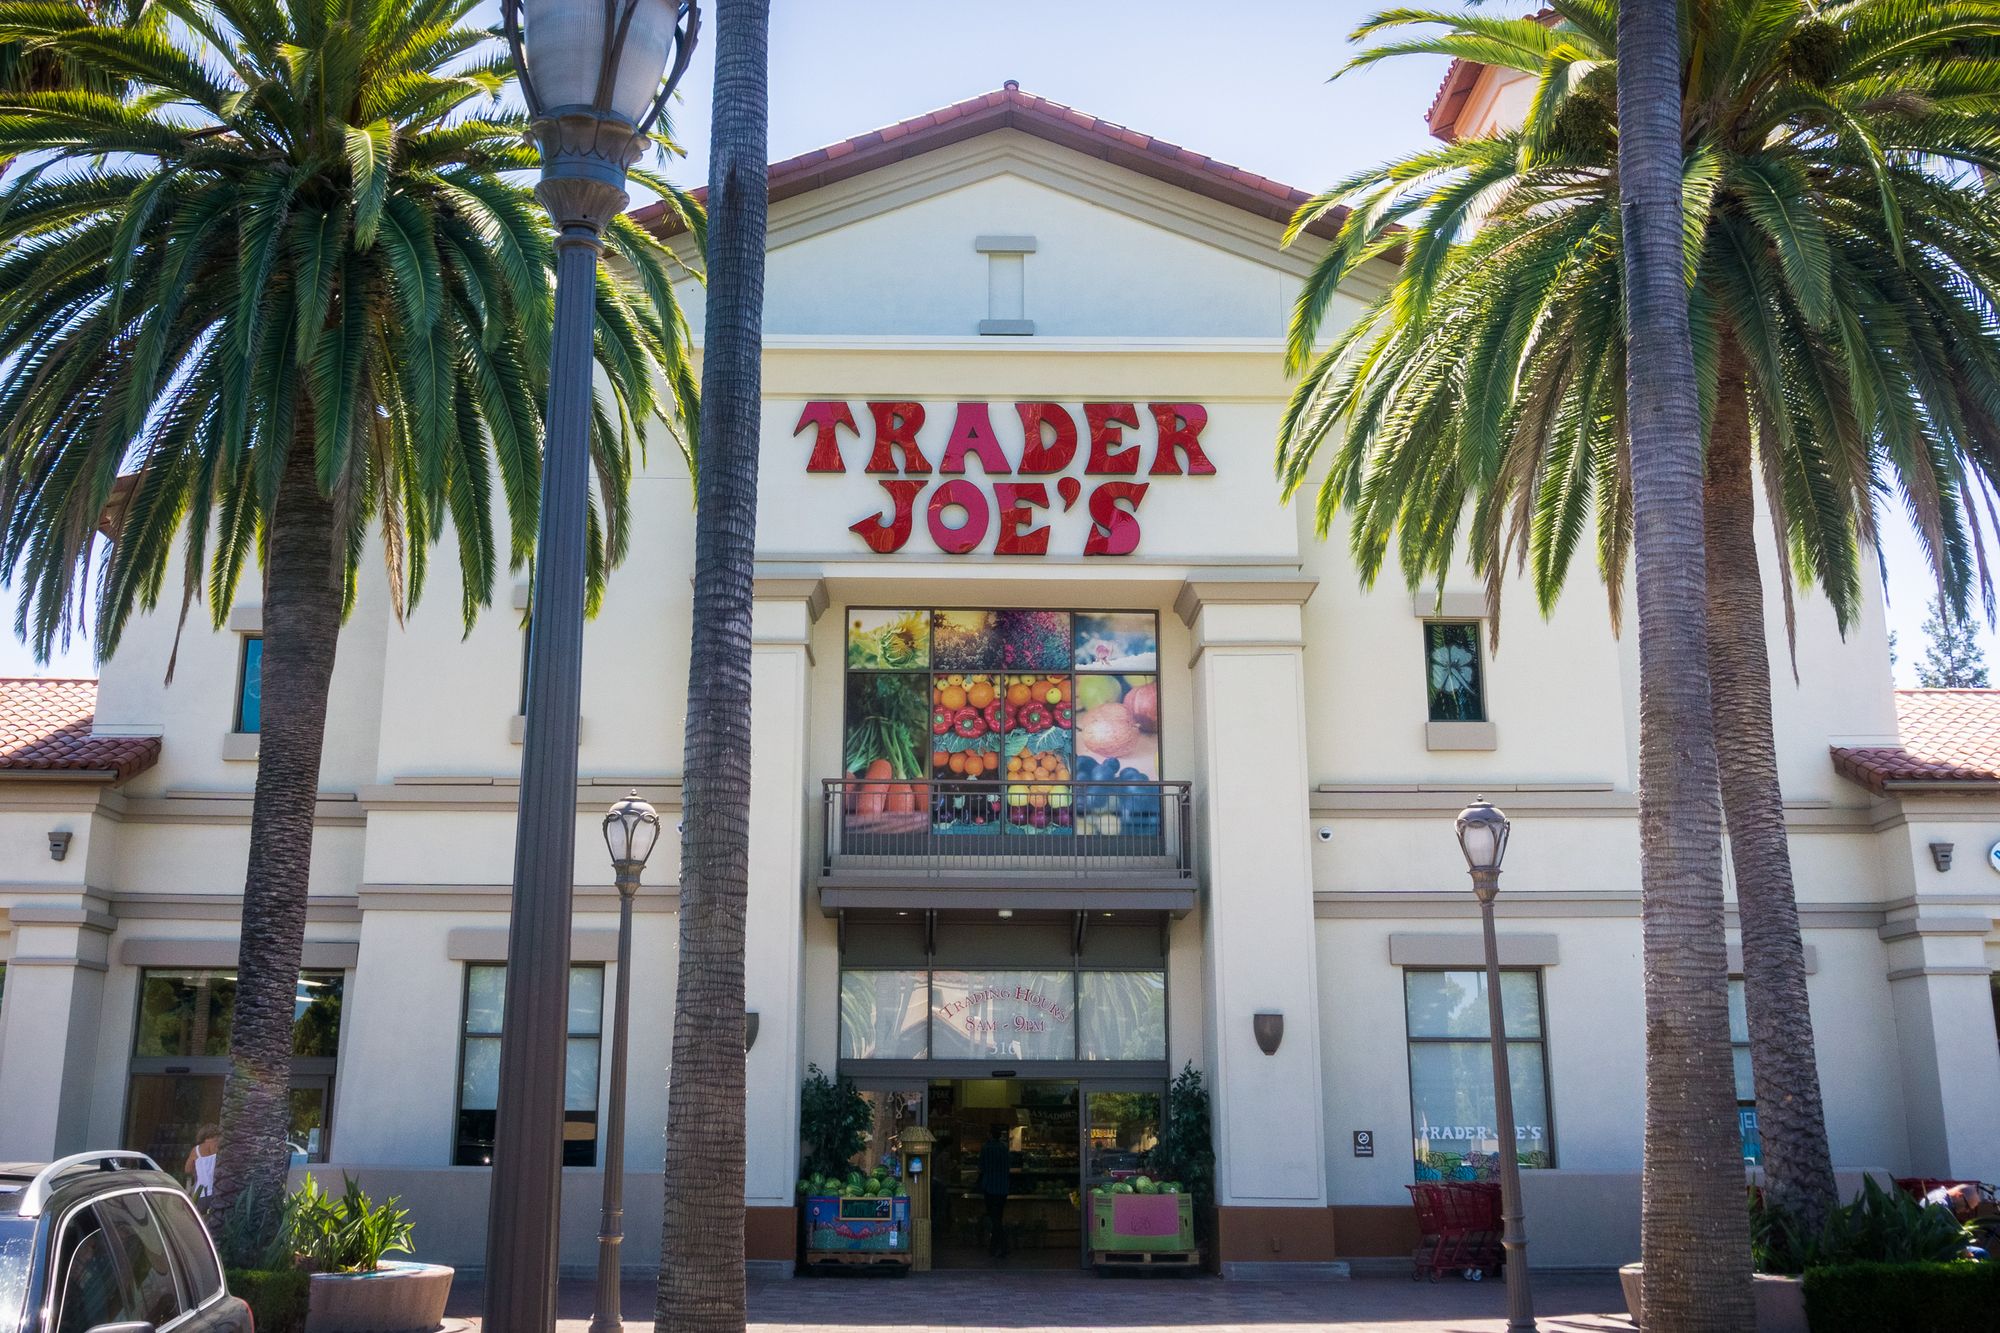 The Best Trader Joe’s Olive Oils 2021 Blind Tasted by 5 Experts